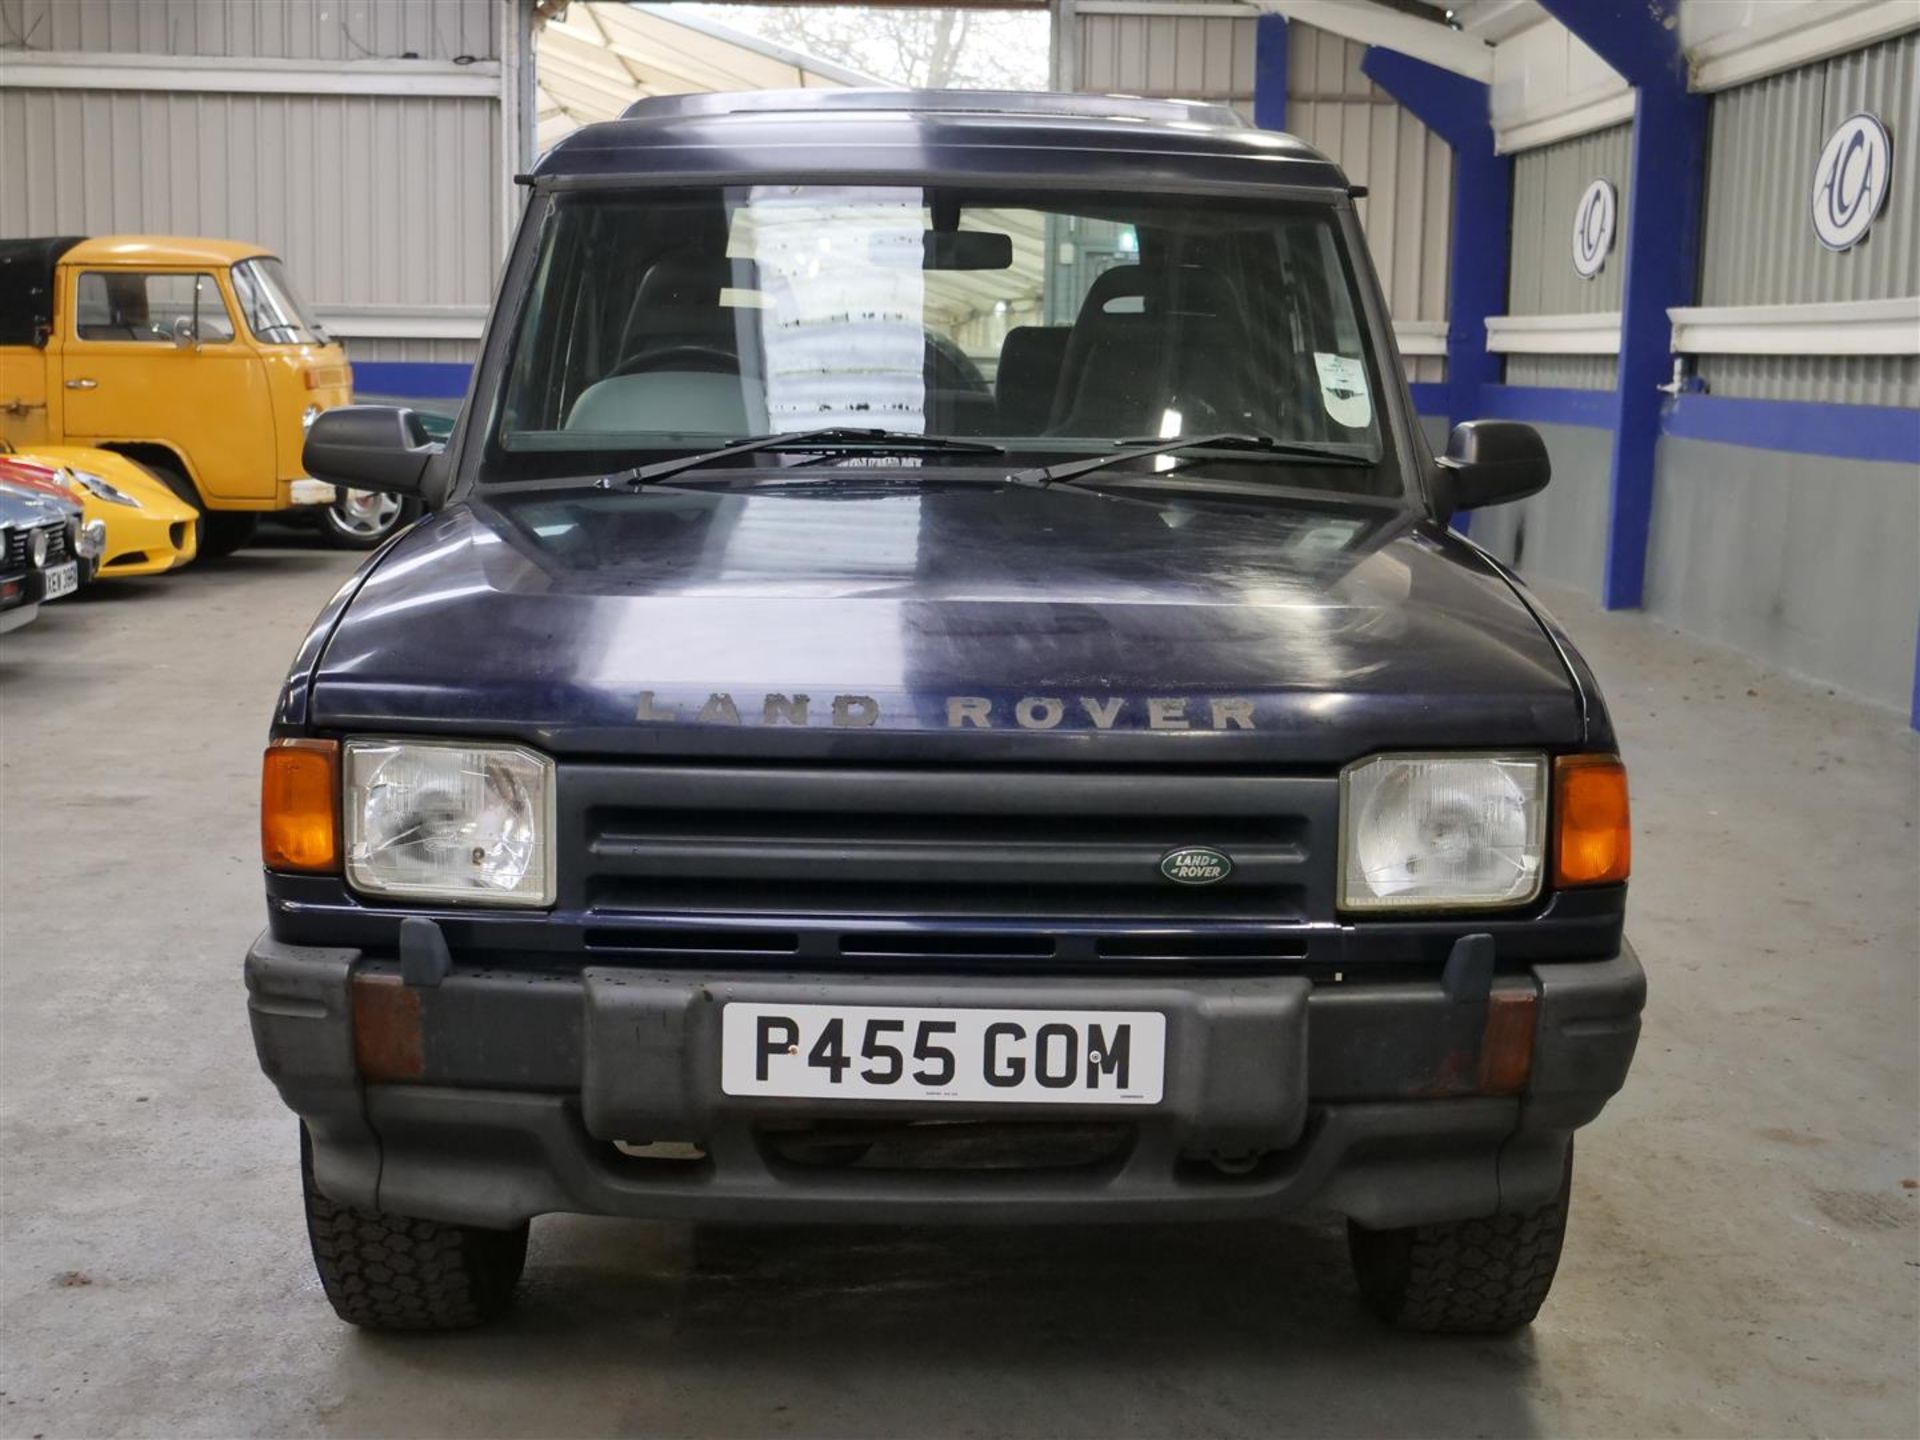 1996 Land Rover Discovery 2.5 TDI - Image 13 of 30